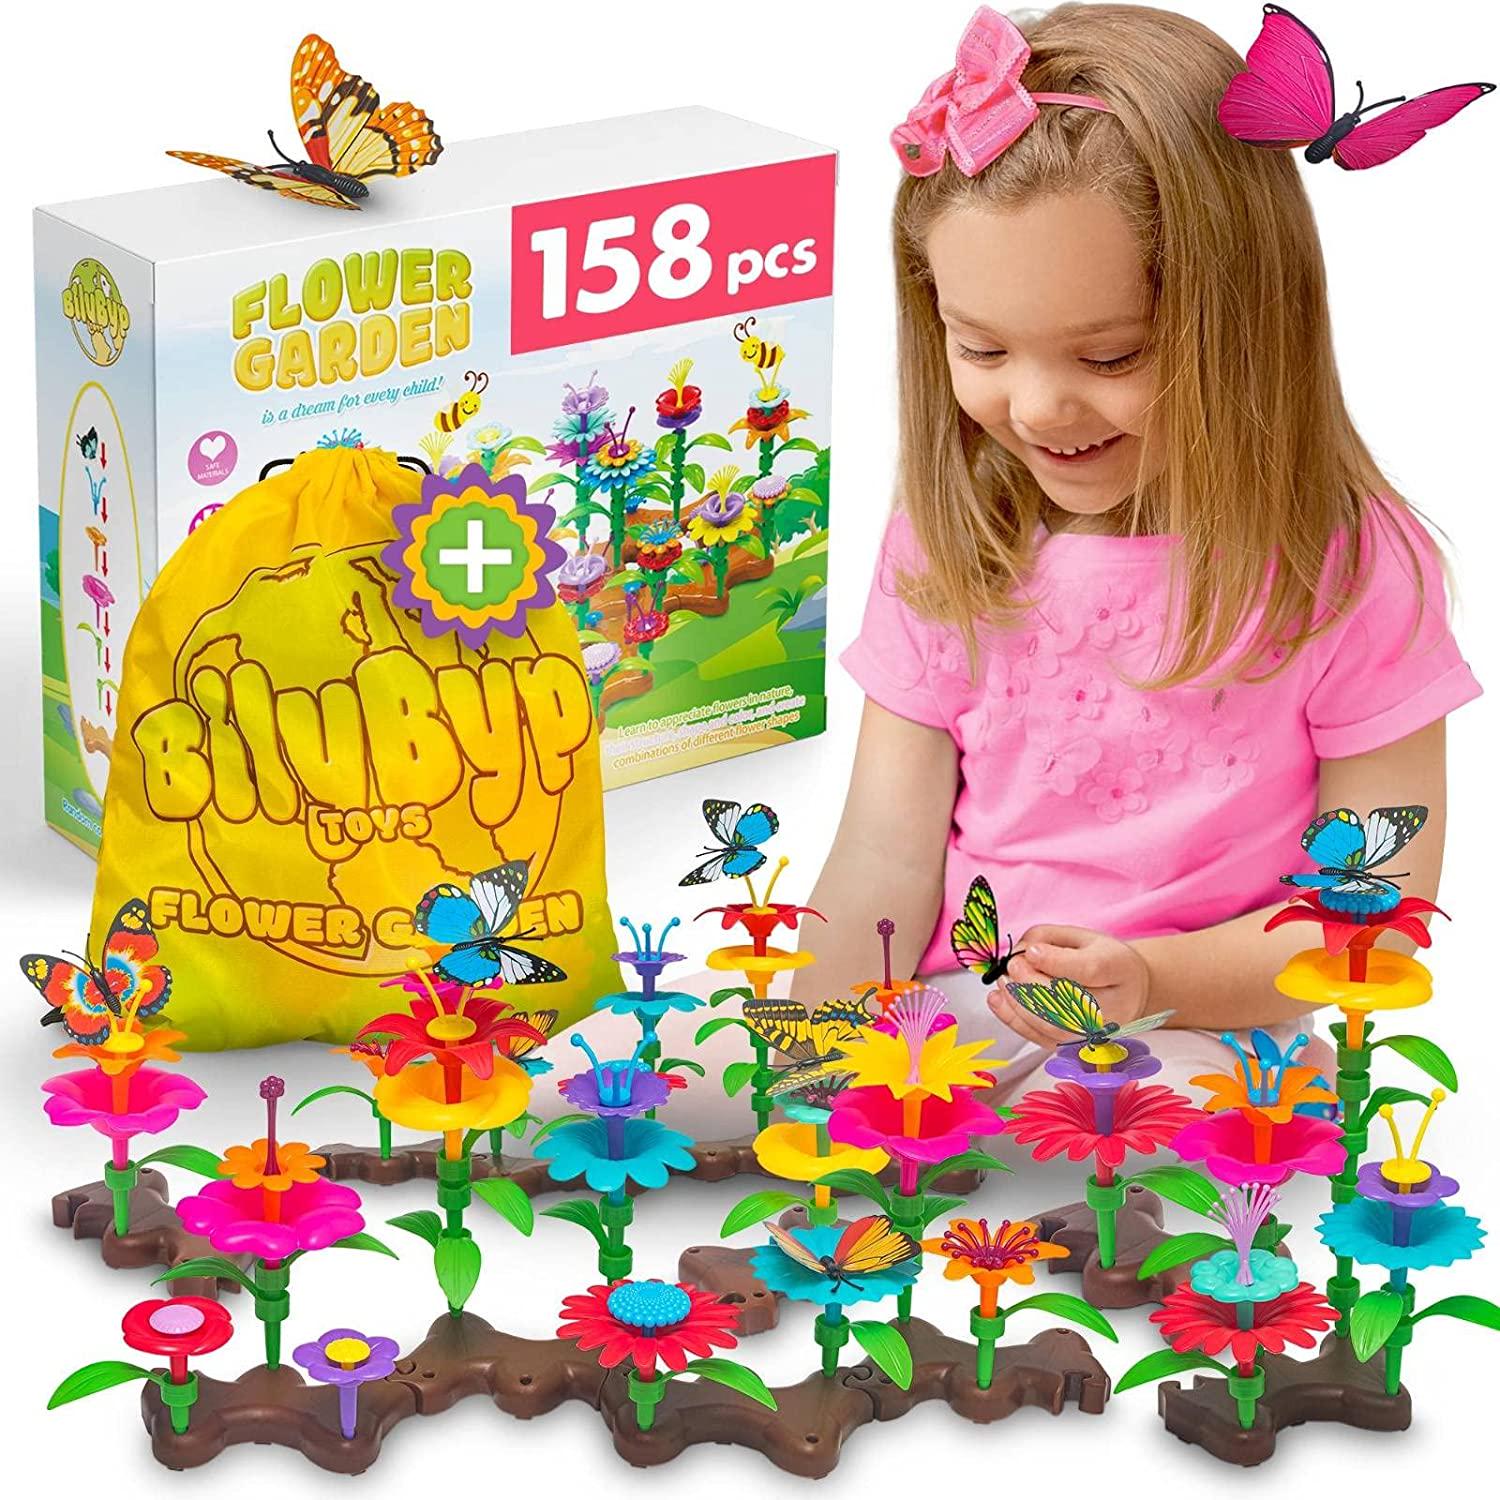 SuccessHunters, Flower Garden Building Toys for Girls and Boys [Age 3 6] 158-Piece Flower Building Toy Set with Butterflies, Blooms, Stems, Bases Build a Garden Flower Building STEM Toy for 3 Year Old Girl Gifts